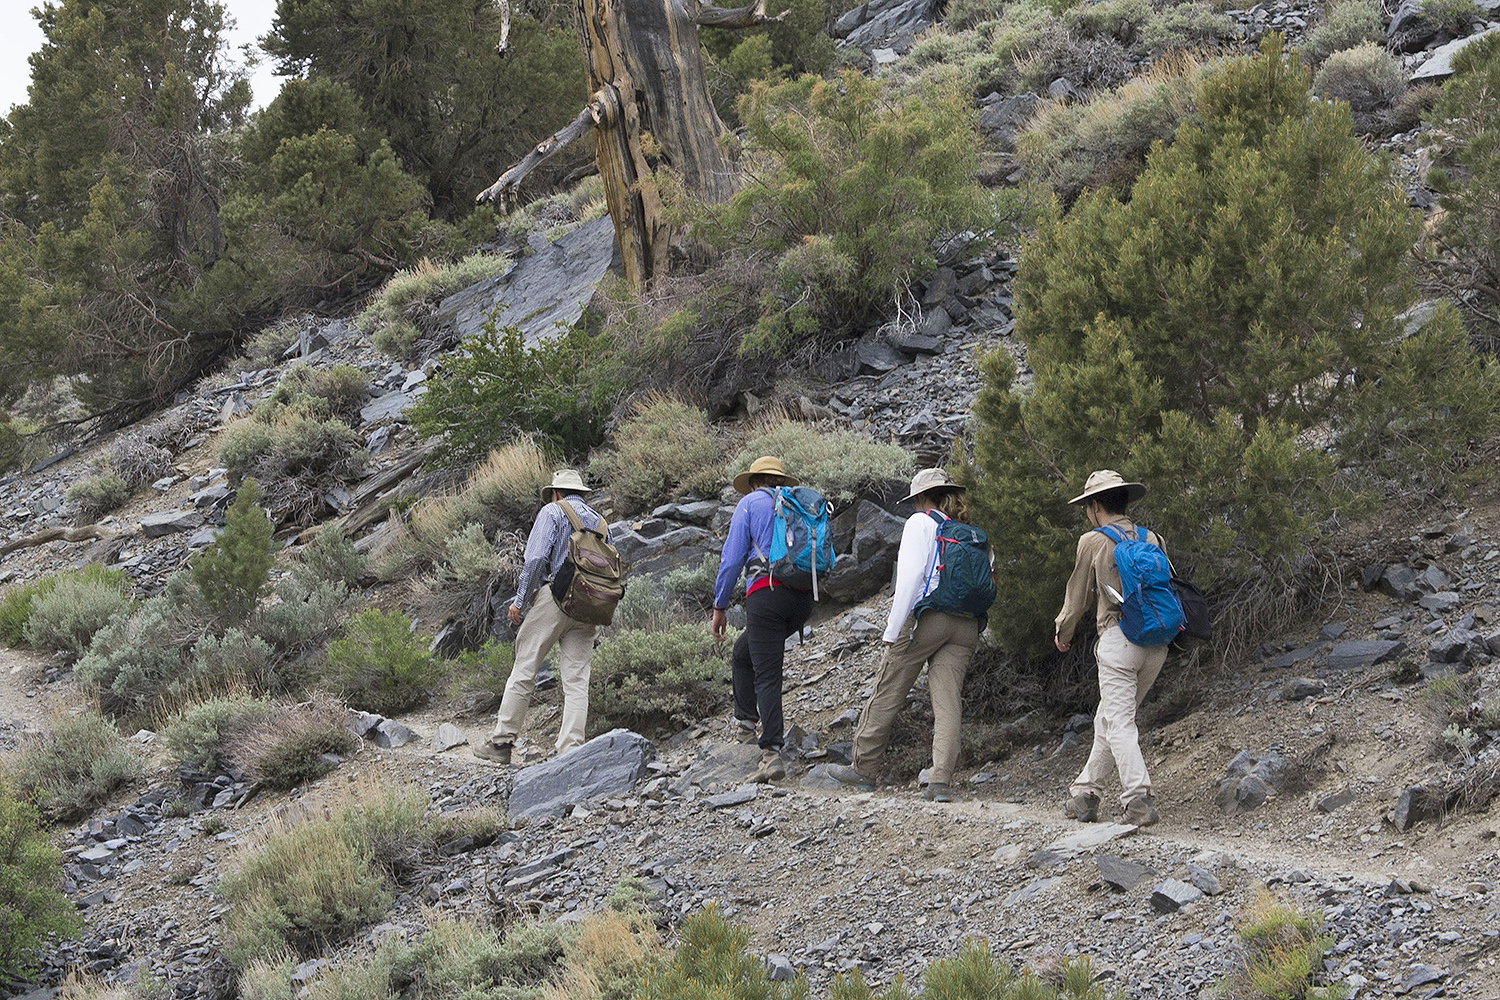 The research team hiked to 9,600 feet to sample rhizospheres of prickly pear and sagebrush. 